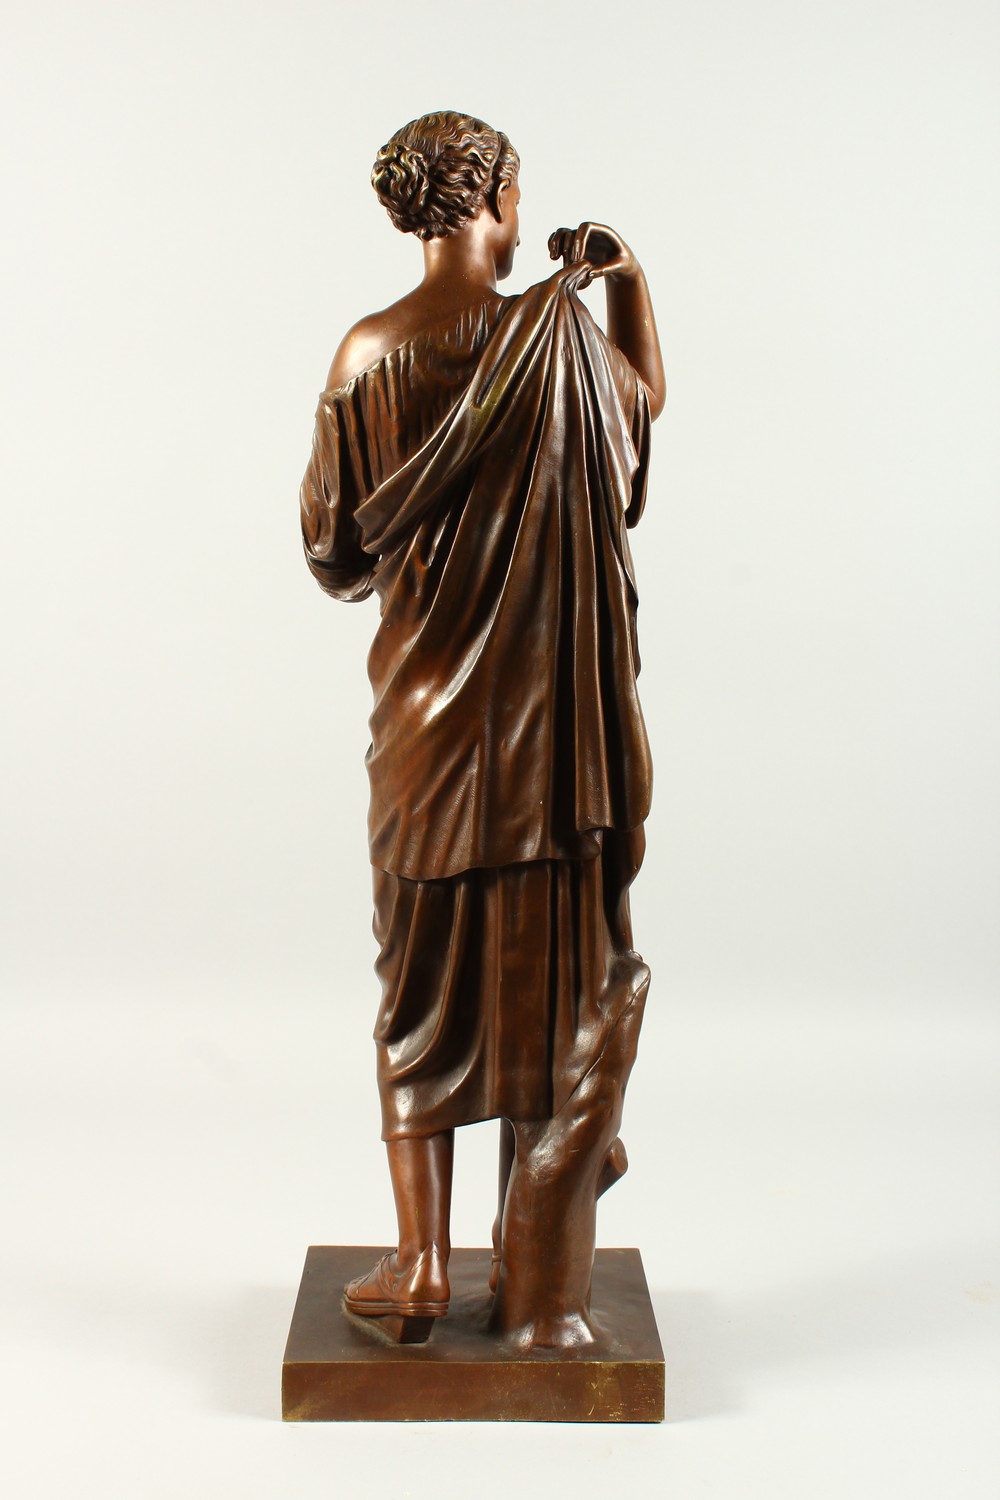 19TH CENTURY ITALIAN SCHOOL. A STANDING BRONZE OF A CLASSICAL LADY on a square base. 68cms high. - Image 6 of 9